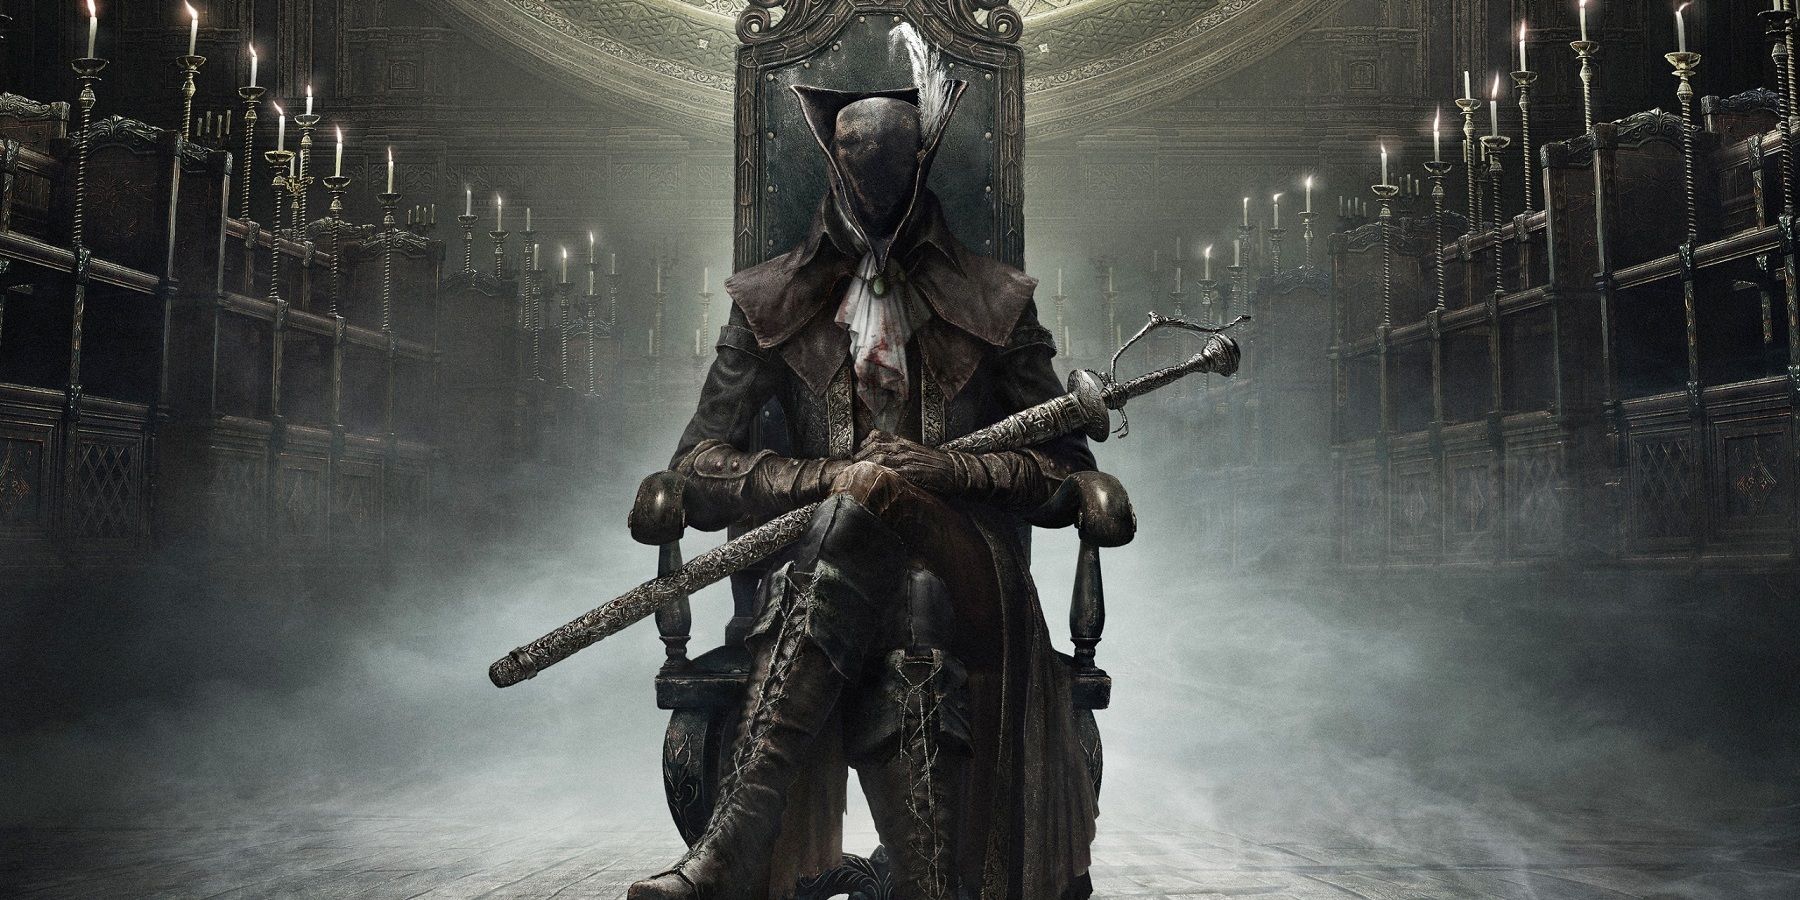 The hunter from Bloodborne